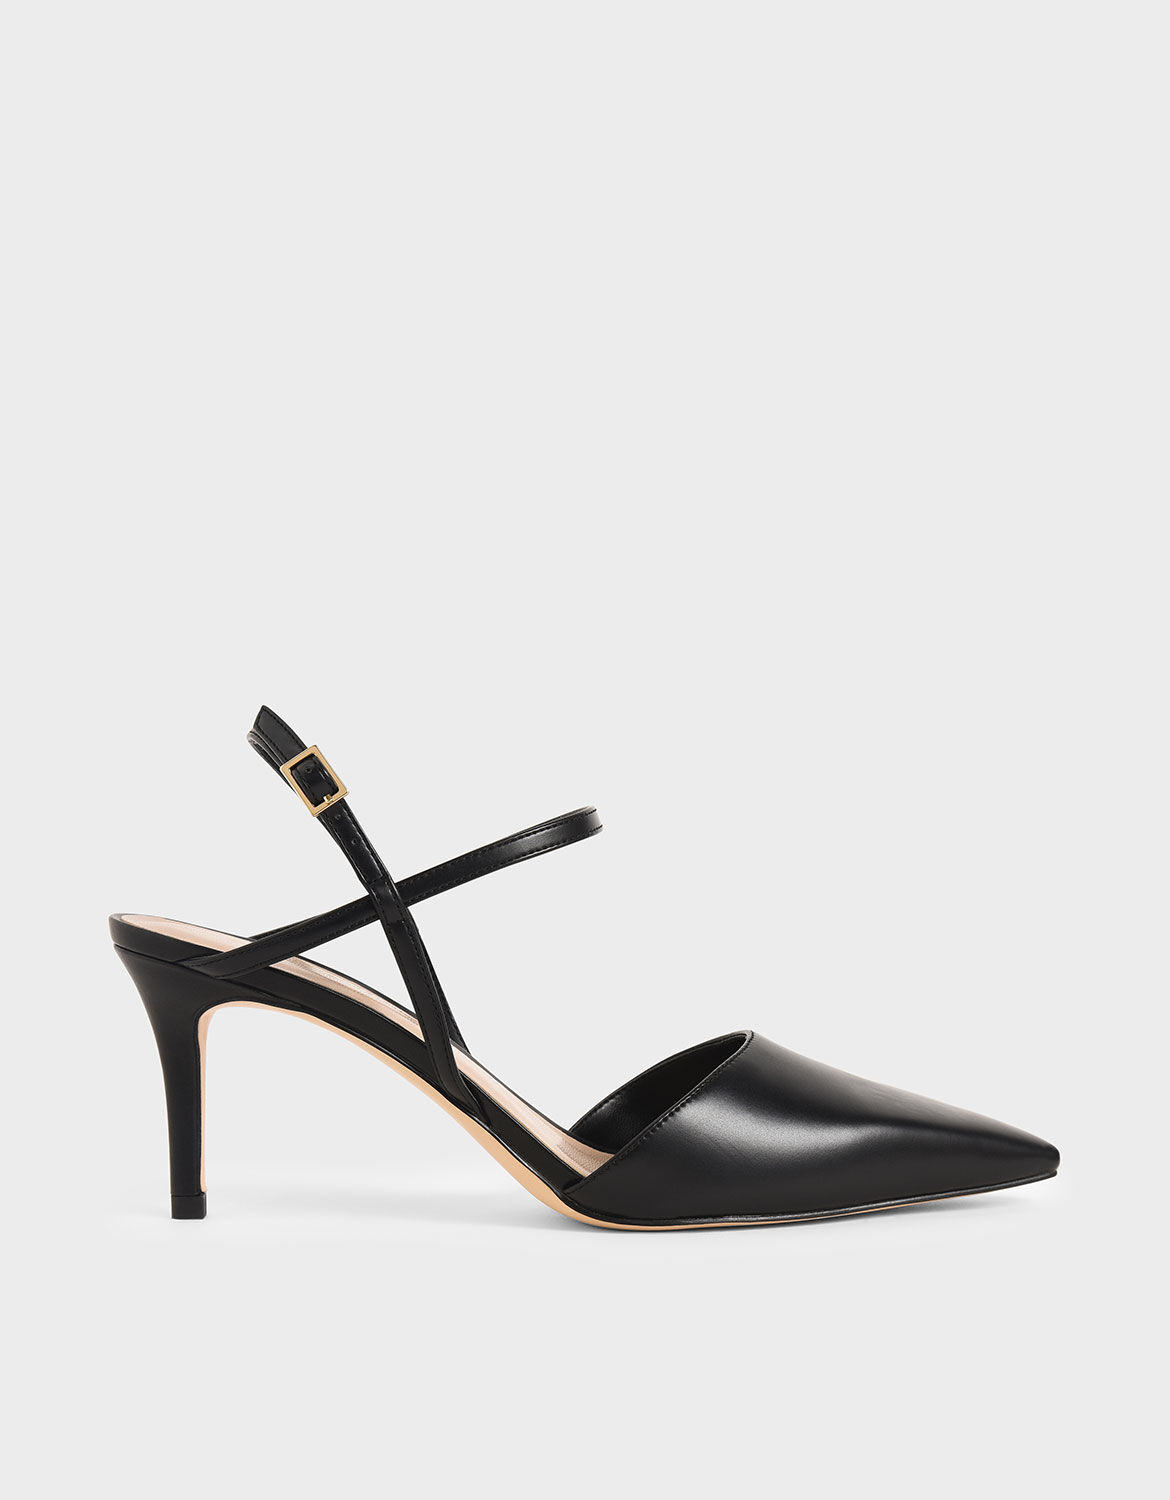 strappy court shoe